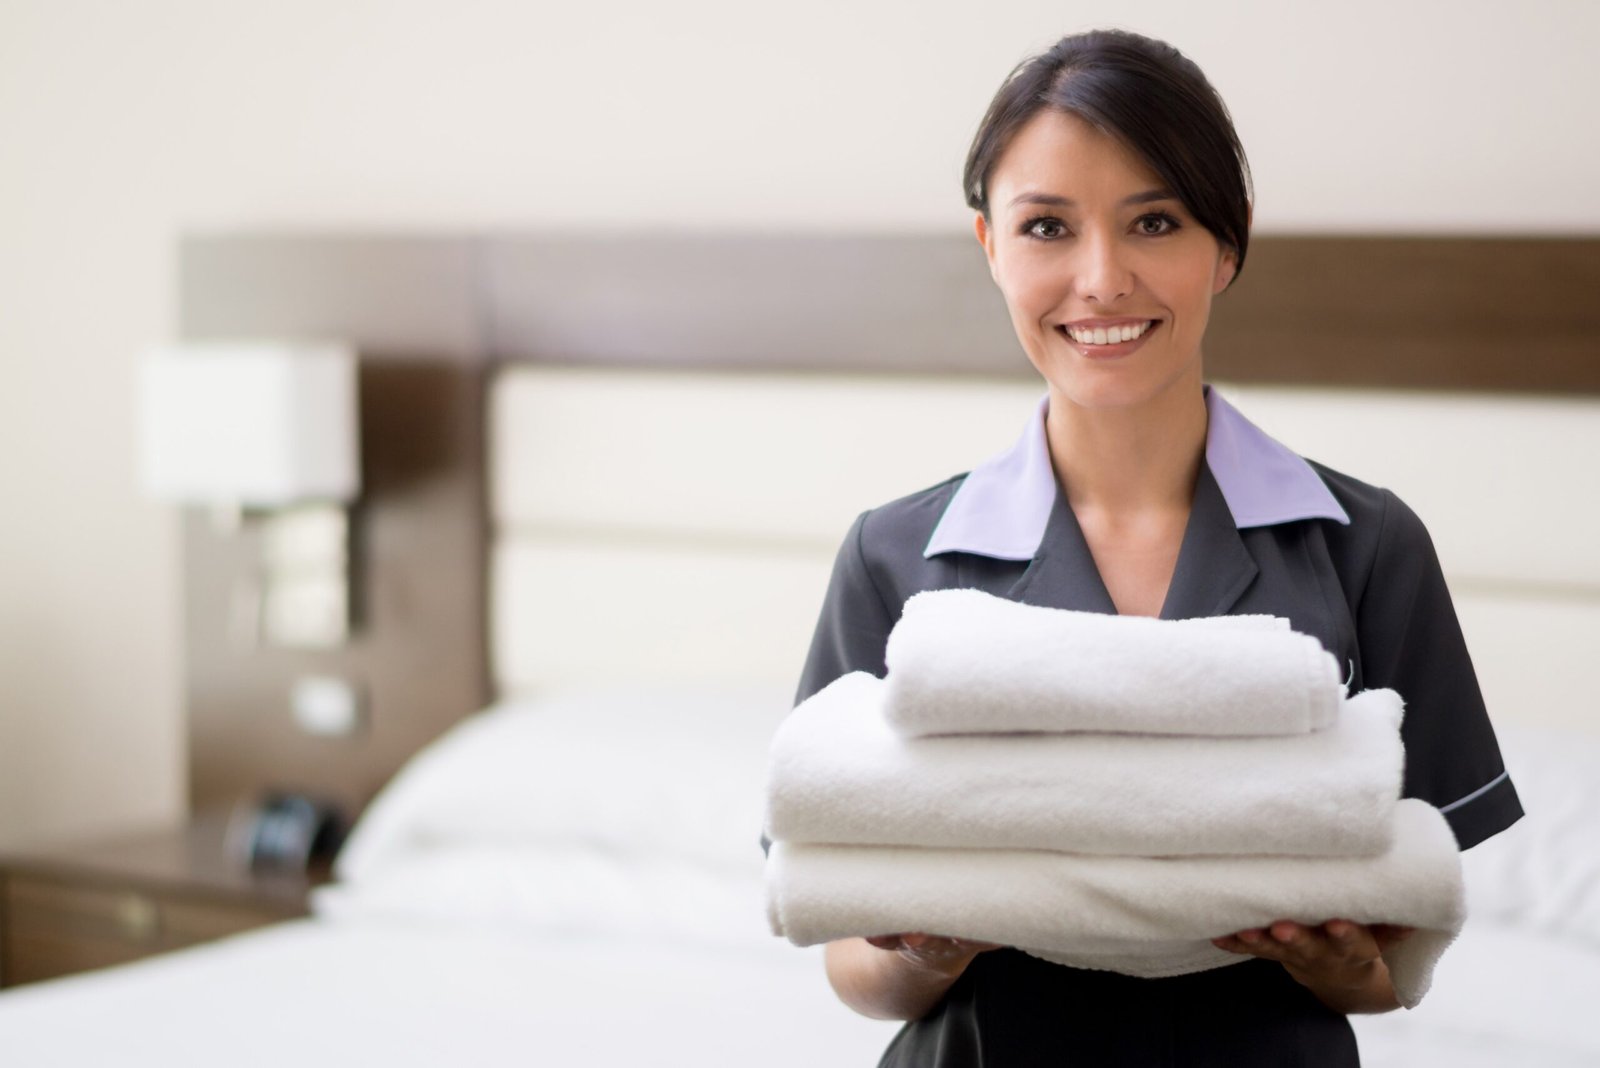 Room cleaner at hotel, holding towels and looking at the camera smiling - housekeeping concepts